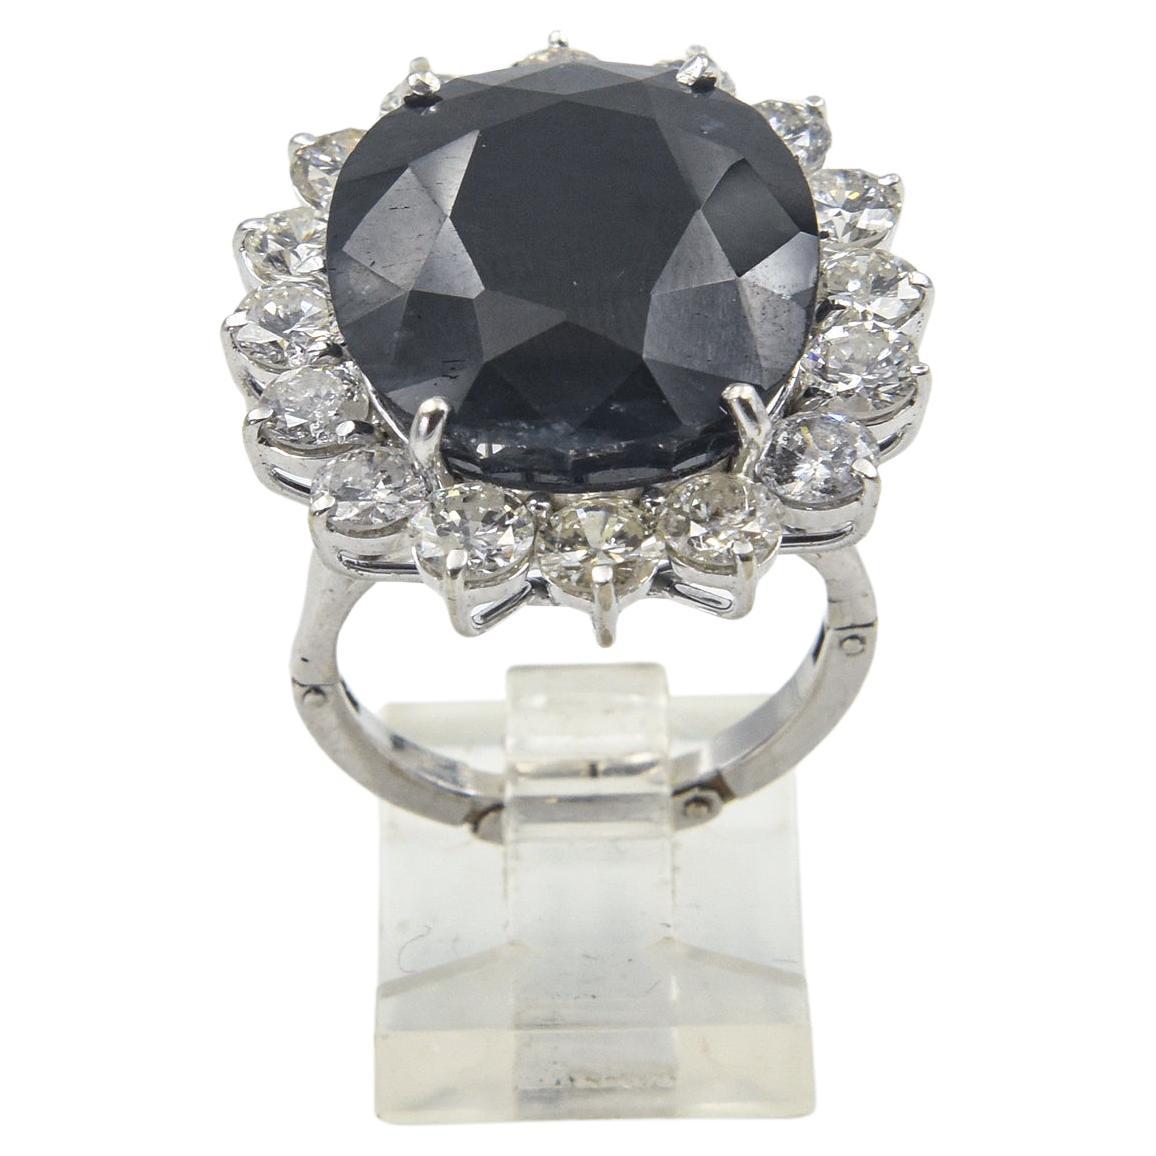 Stunning cocktail ring featuring a dark faceted blue sapphire weighting approximately 30 carats surrounded by 16 diamonds with approximate total weight of 5.60 carats.  The sapphire has been heated which is a normal practice. The mounting is 14k